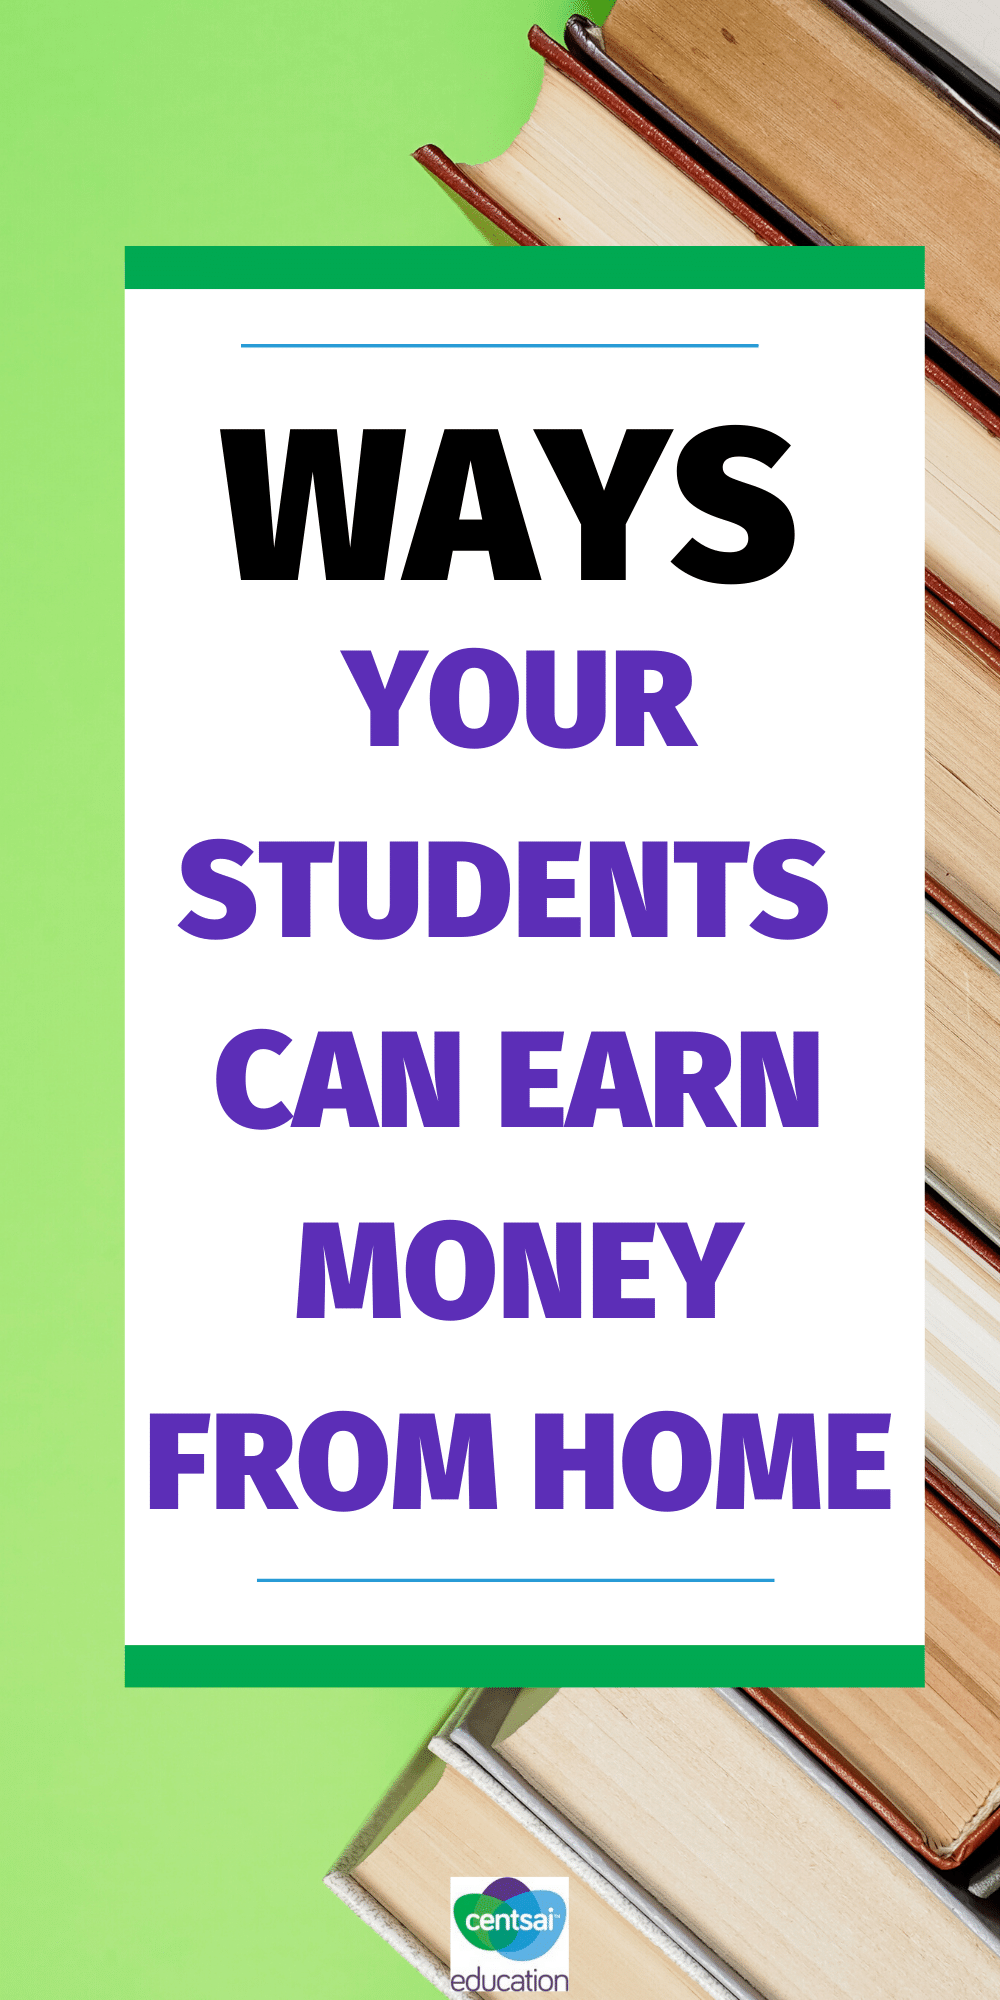 This is a great list of ways your students (or you!) can work from home and earn some extra cash.